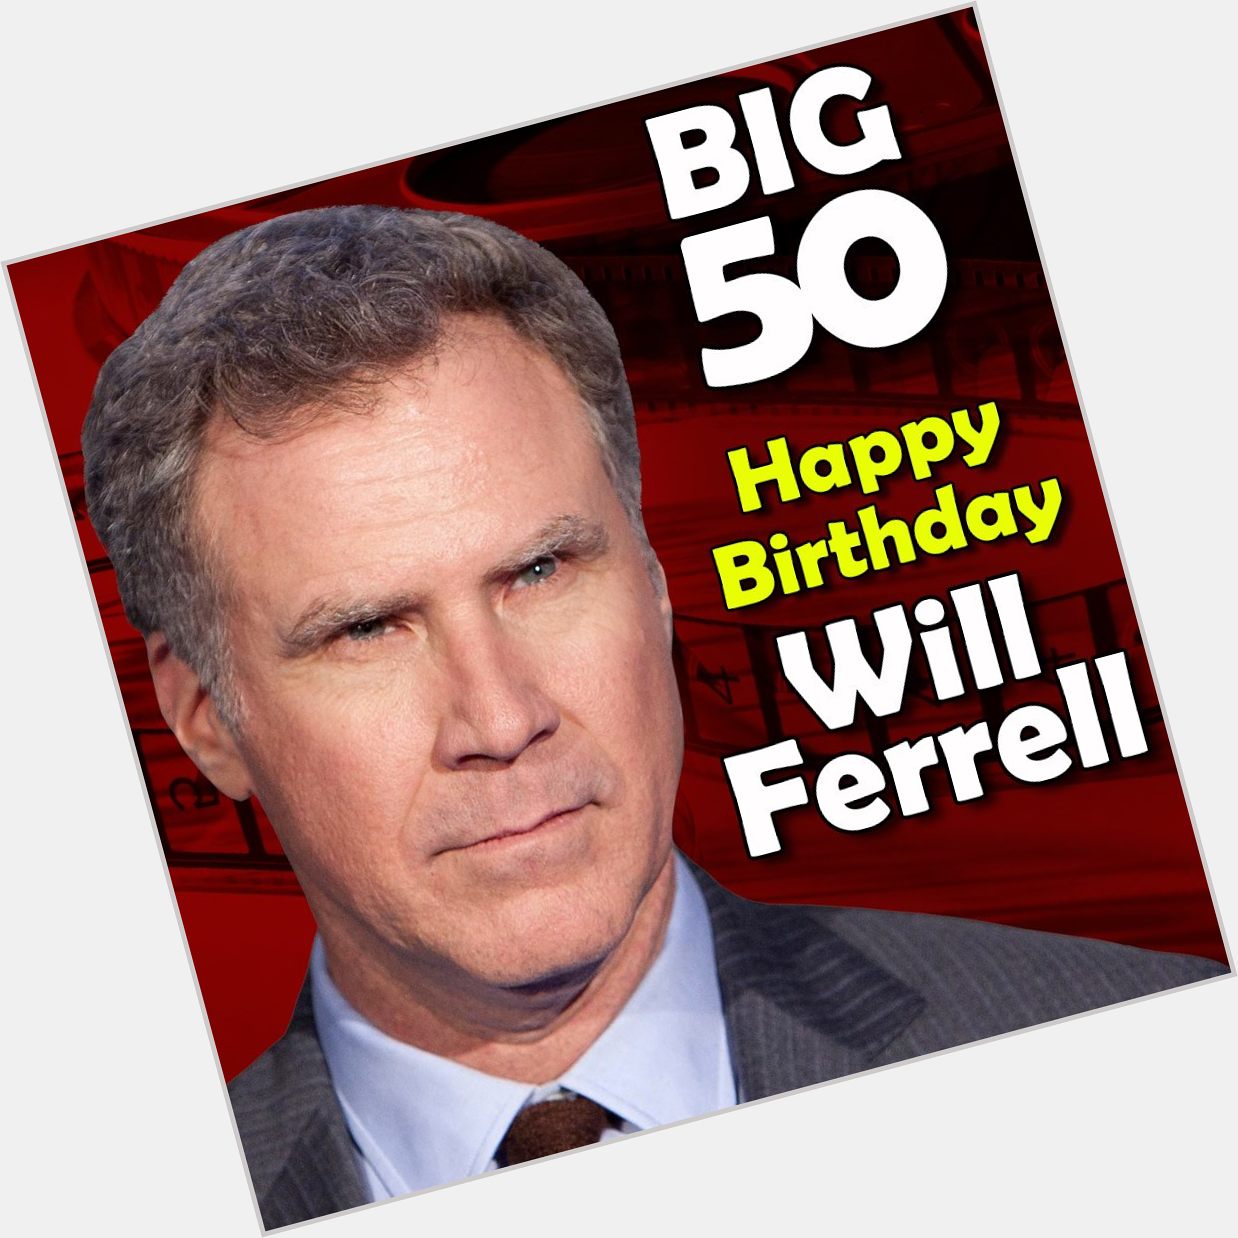  Happy Birthday Will Ferrell!  I loved him in, of course, Anchorman! 